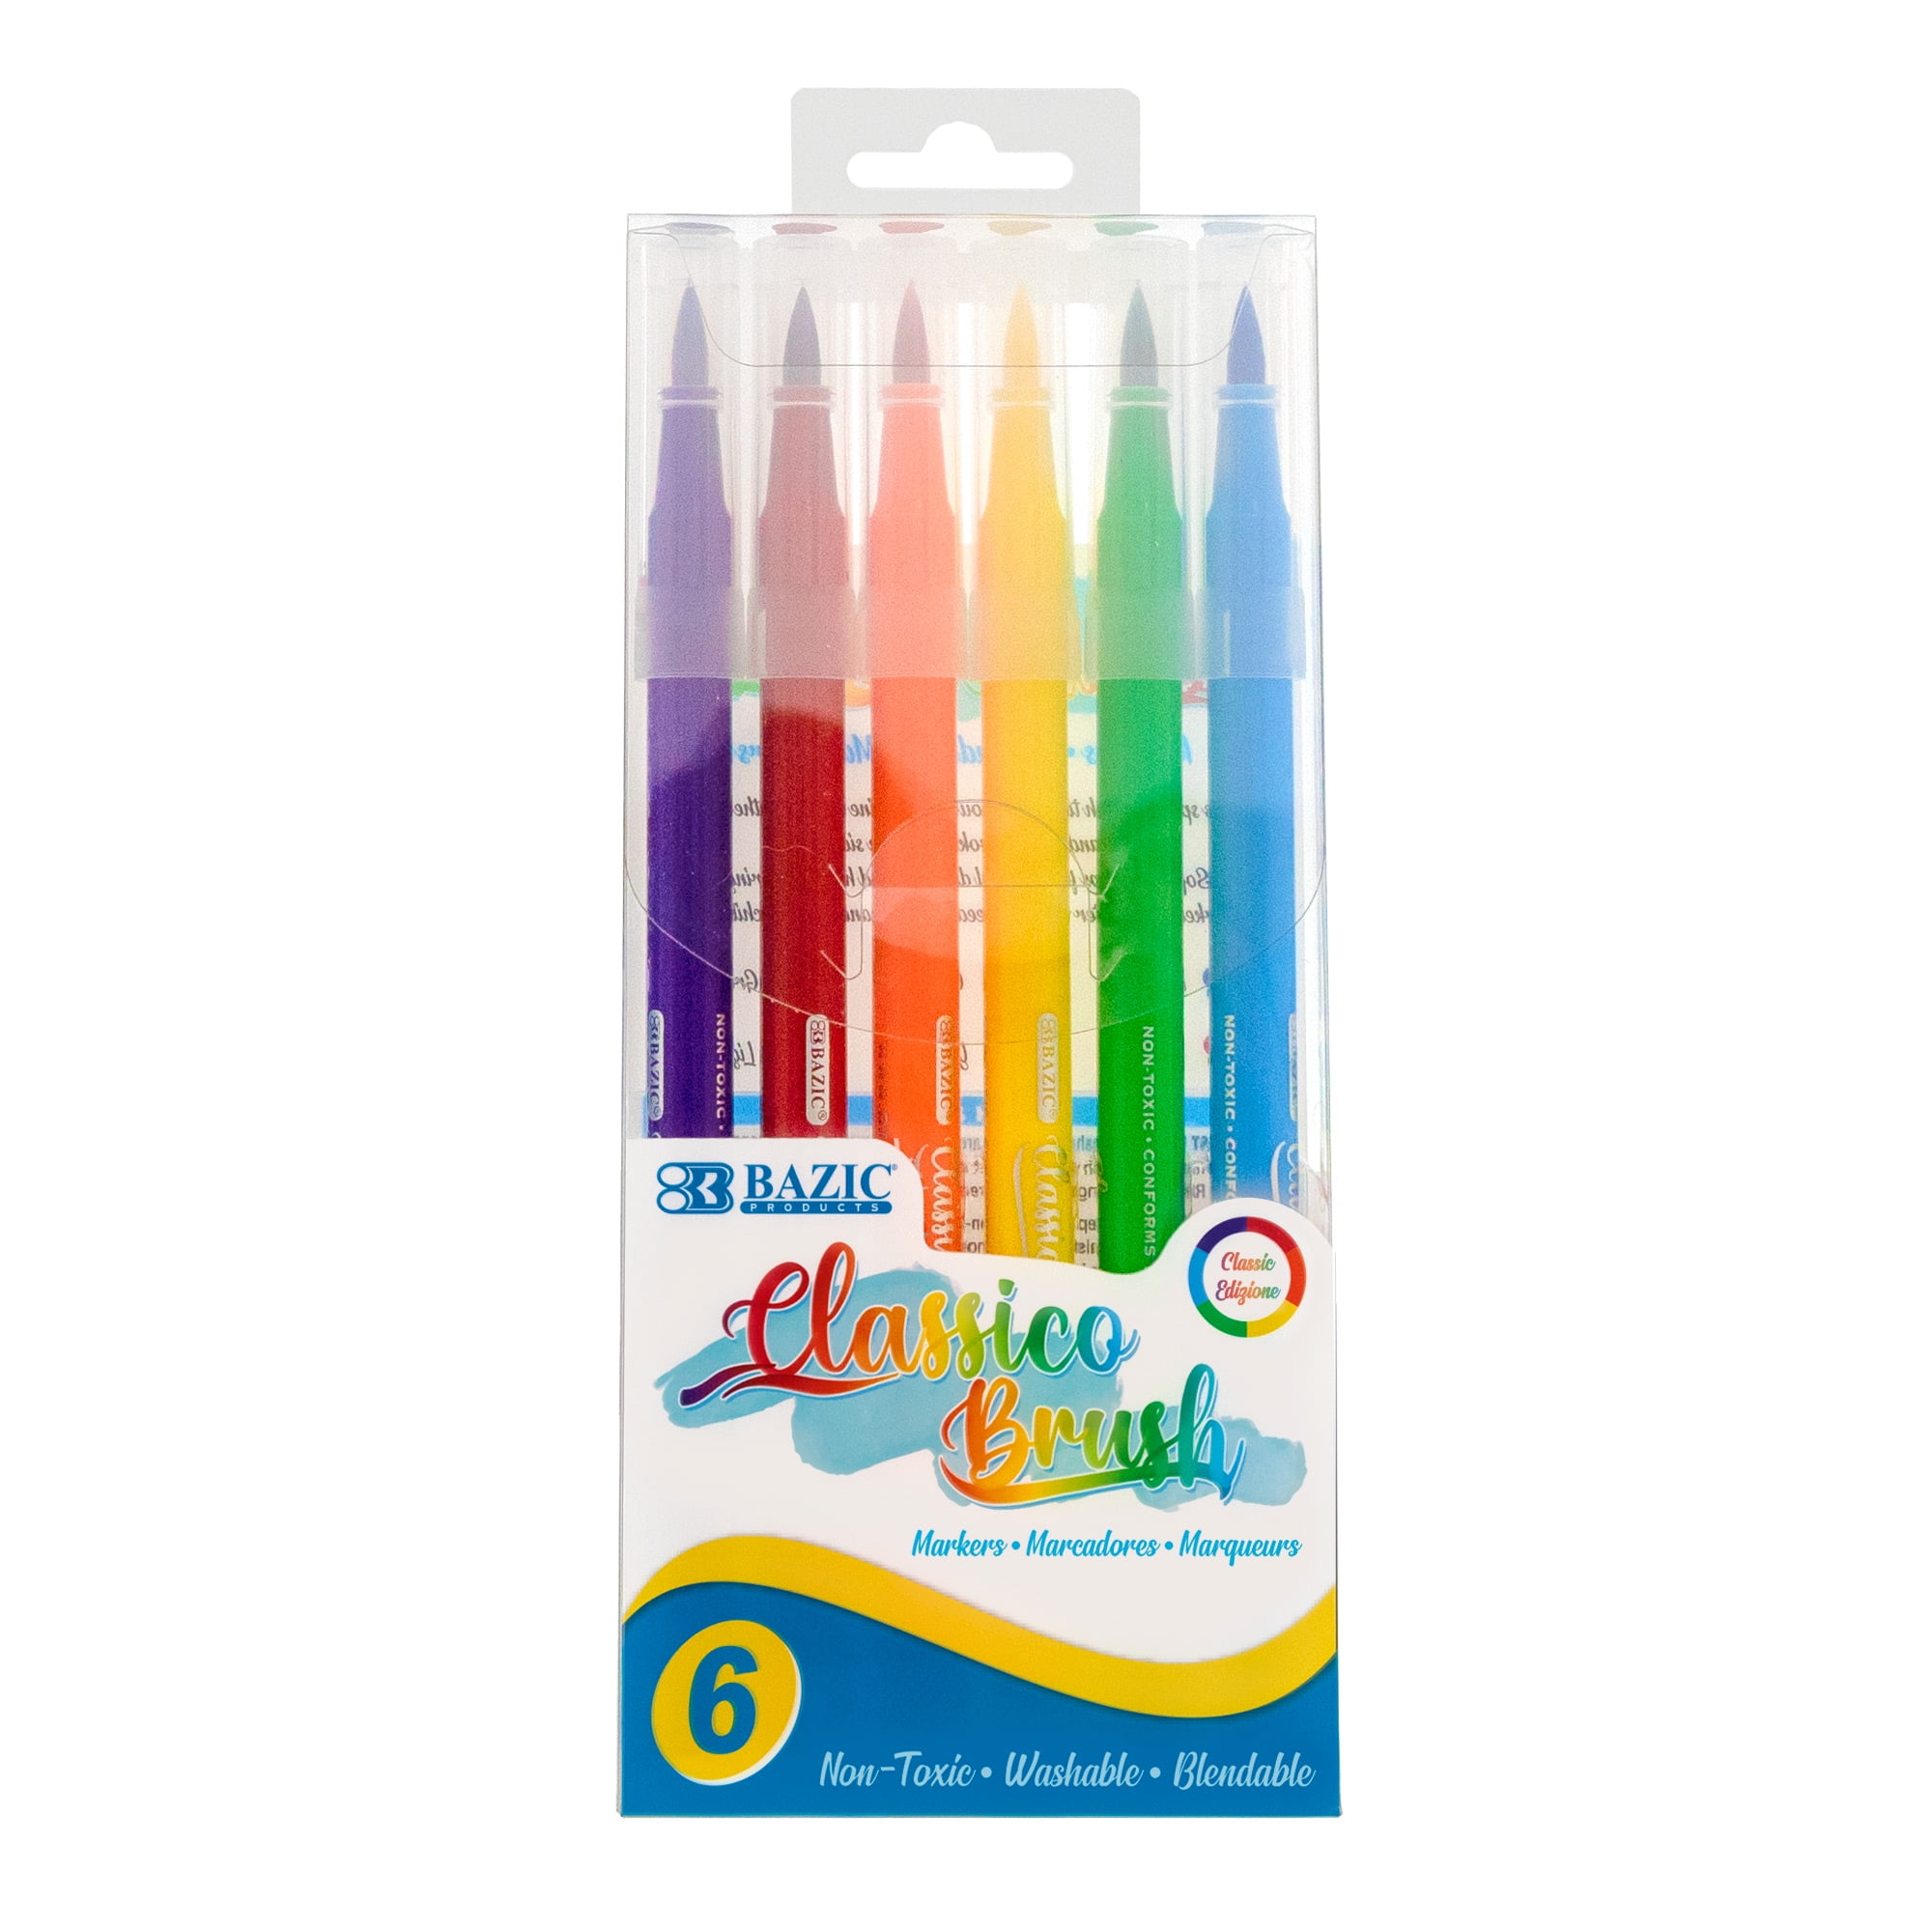 Brush tip markers • Compare & find best prices today »